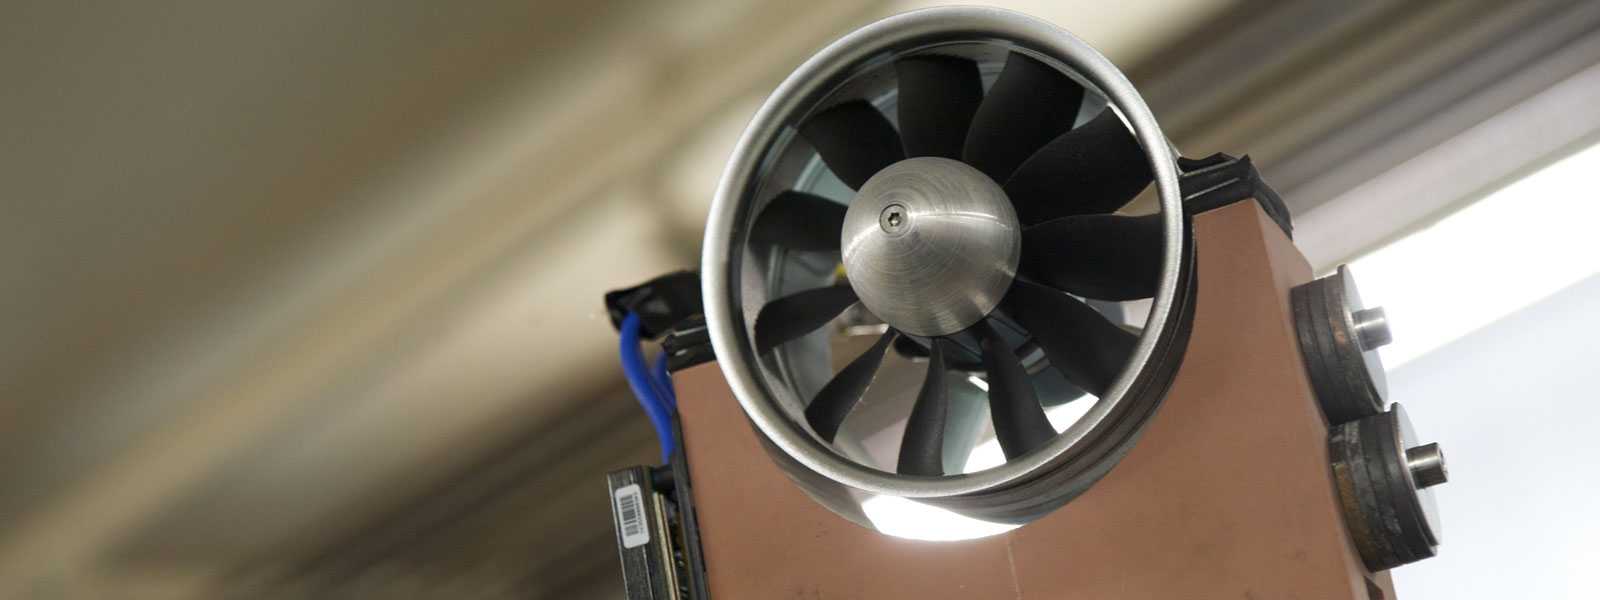 a close up of a fan in the water tank